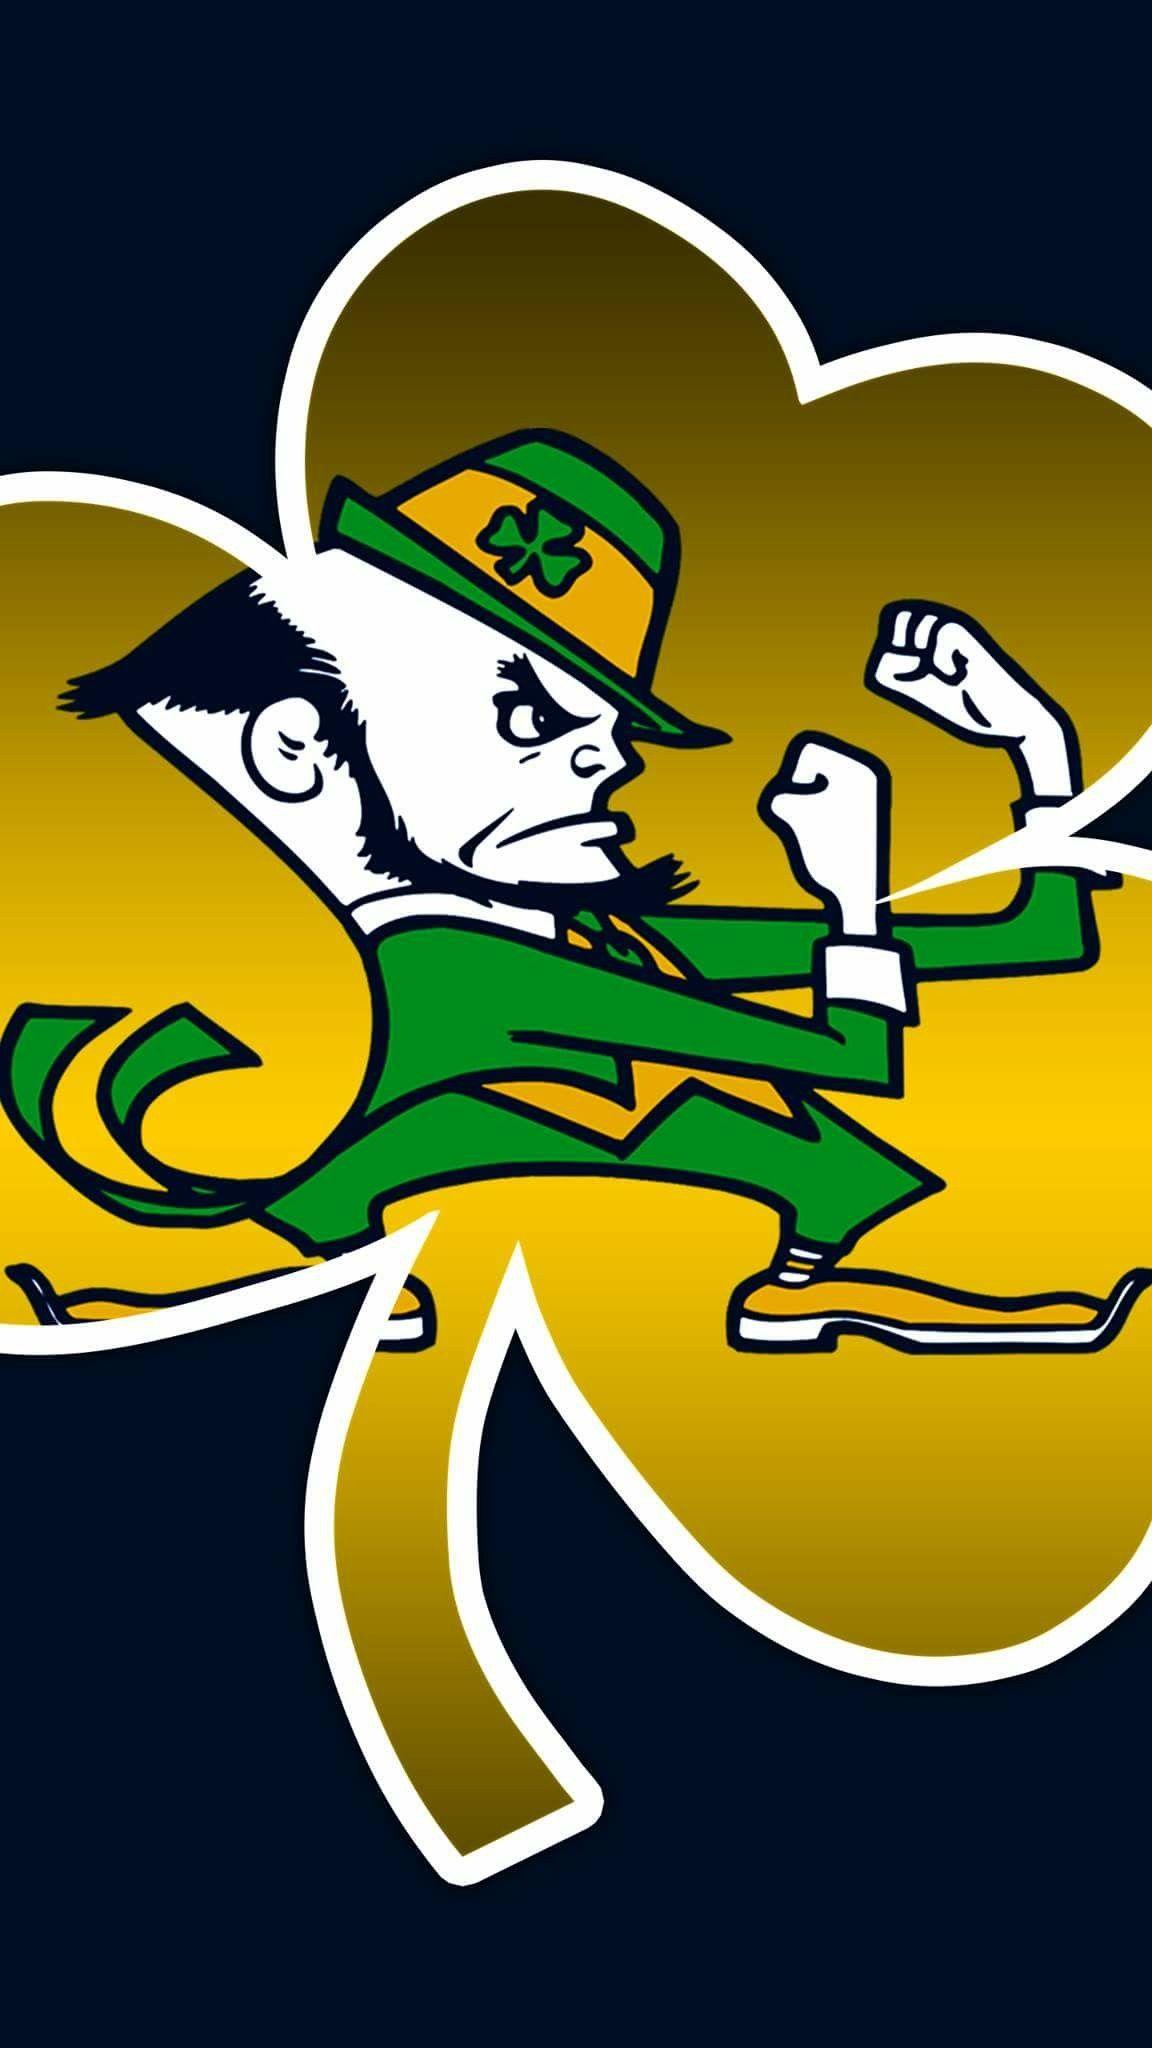 Notre Dame ☘. Notre dame, Fighting